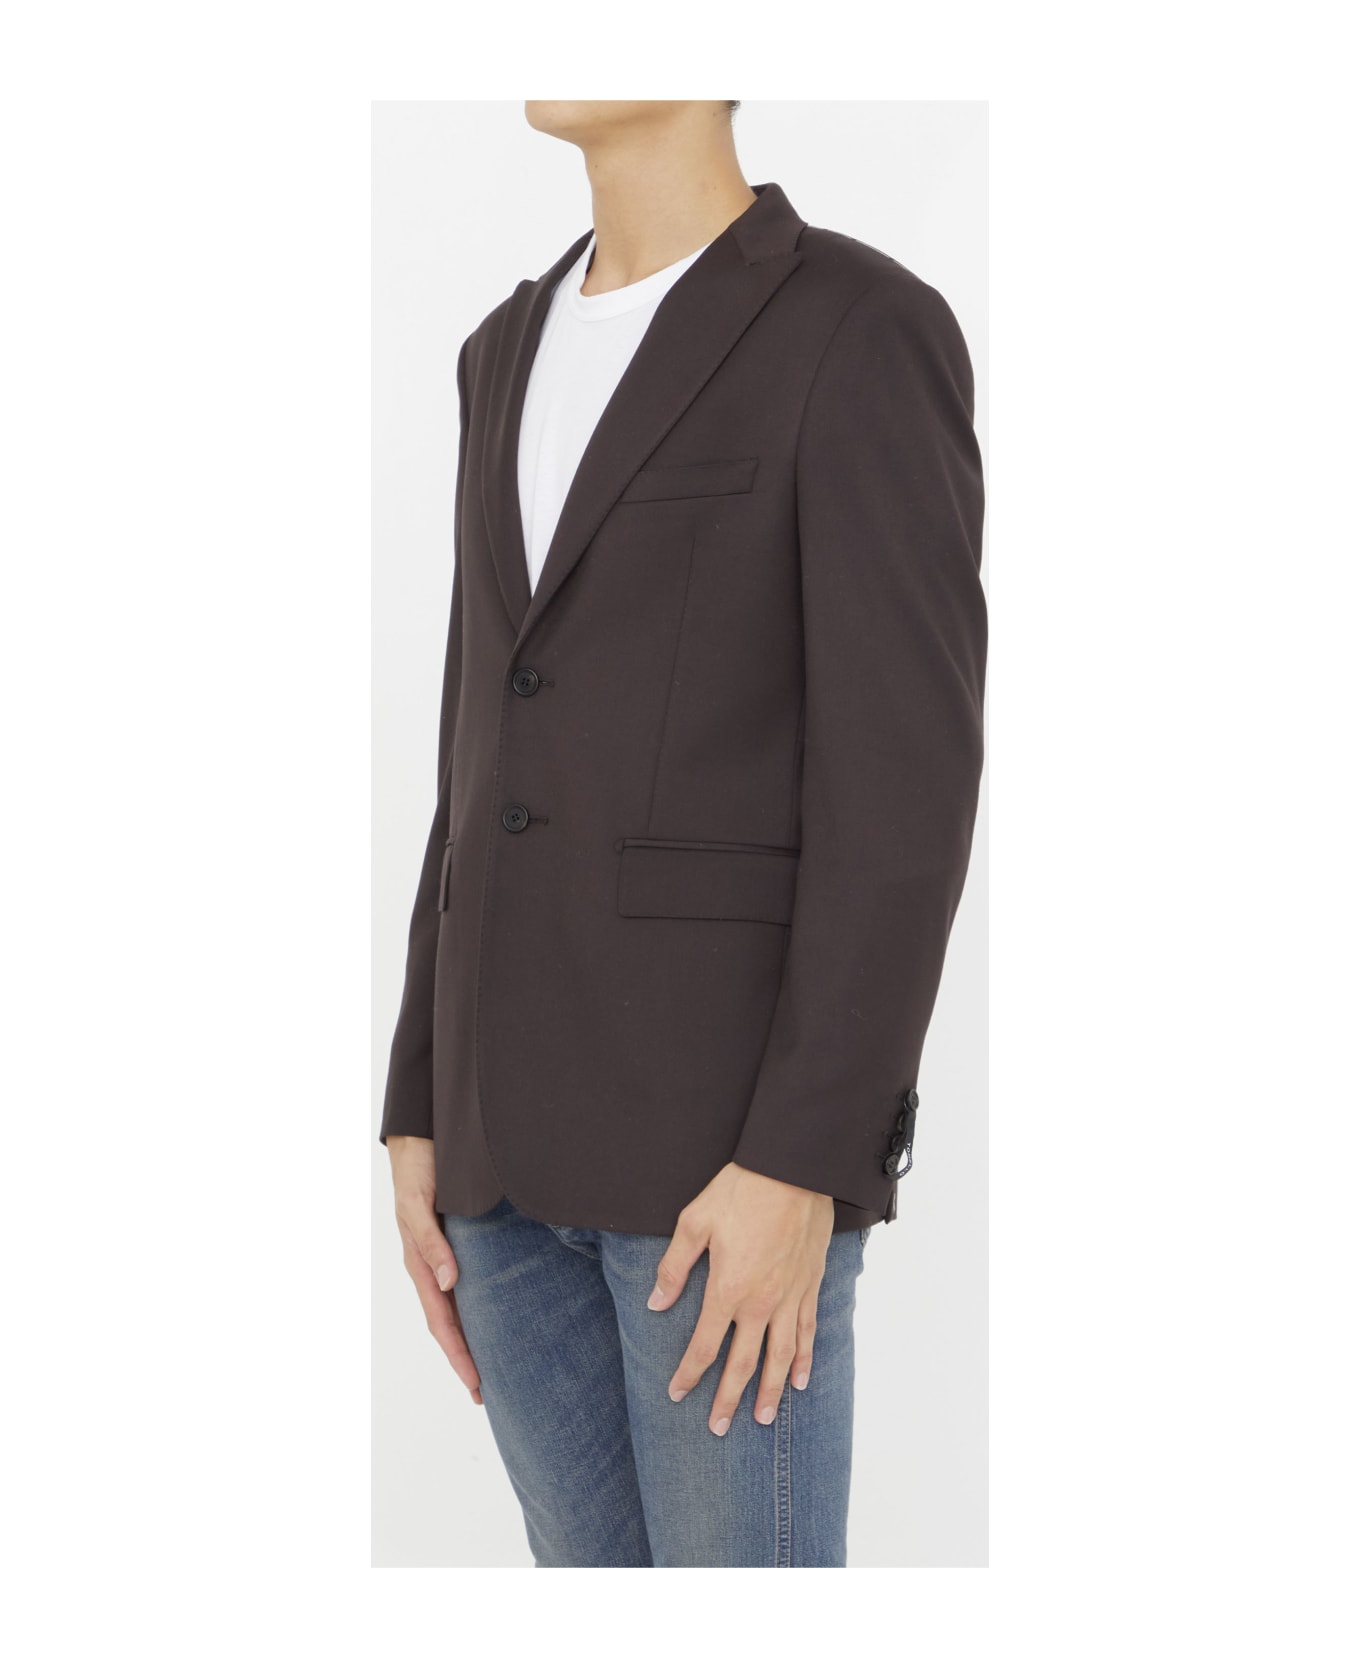 Tonello Suit In Viscose Blend - BROWN ブレザー